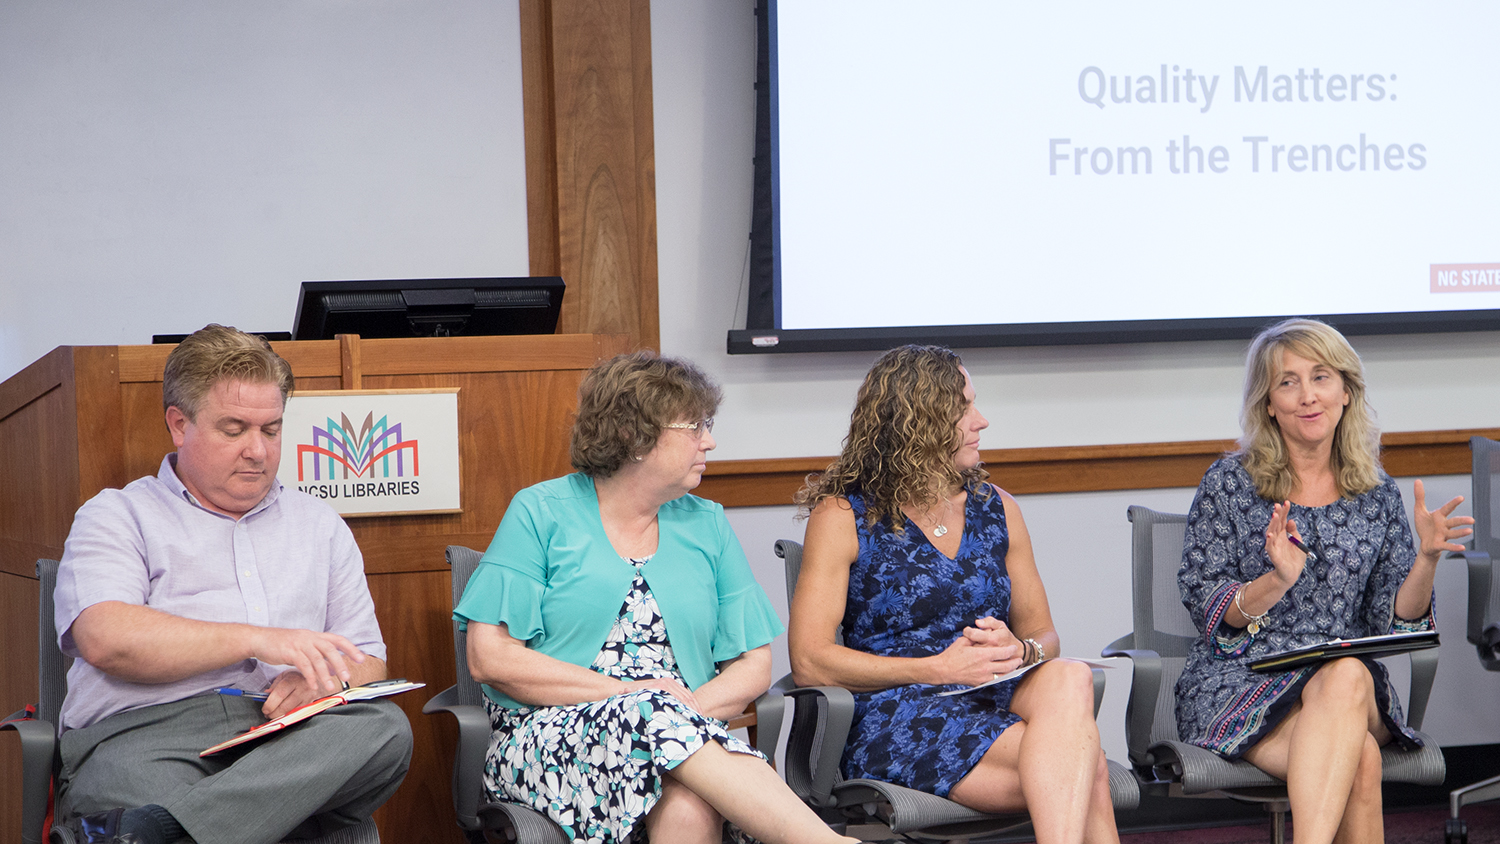 Four faculty members sitting lined up in discussion in front of a presentation and podium